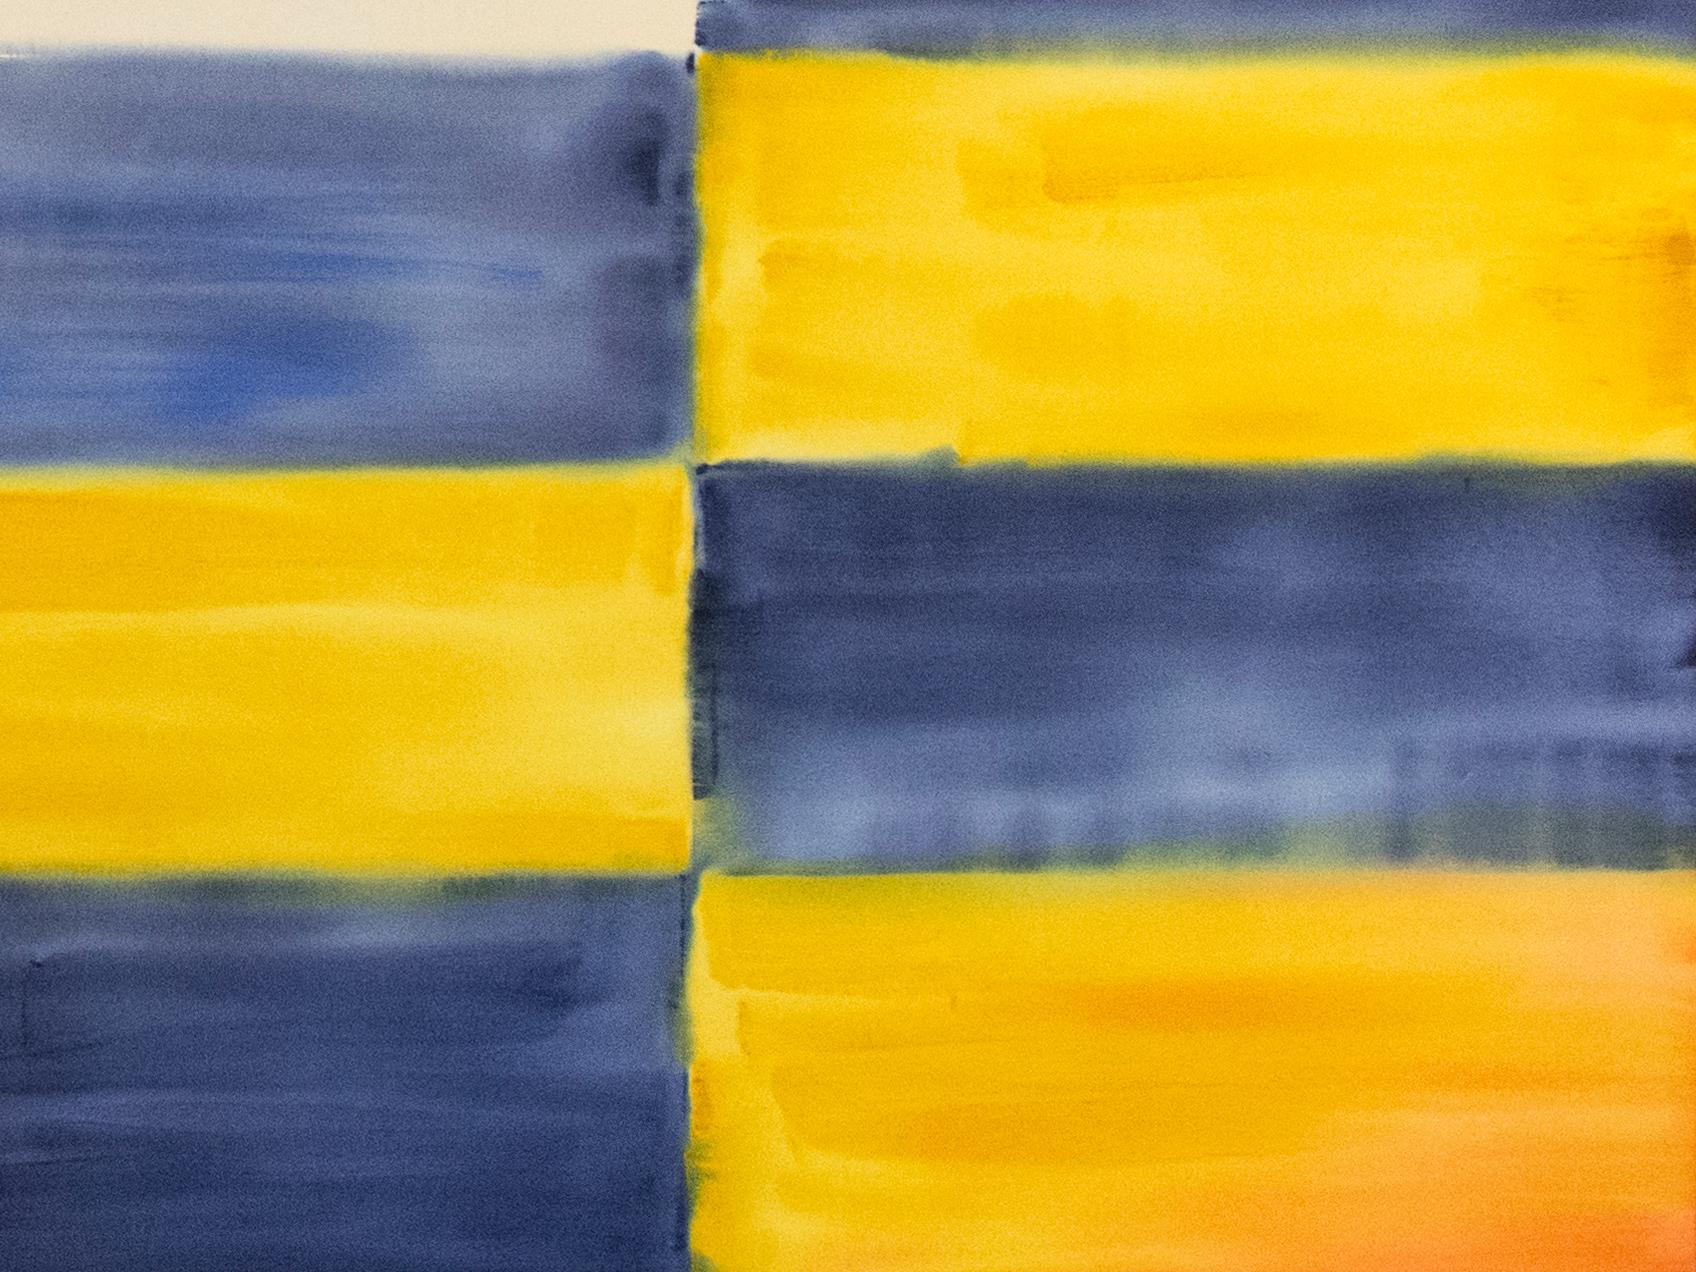 Turner - large, blue, white, yellow, colourful, grid, abstract acrylic on canvas - Abstract Painting by Milly Ristvedt